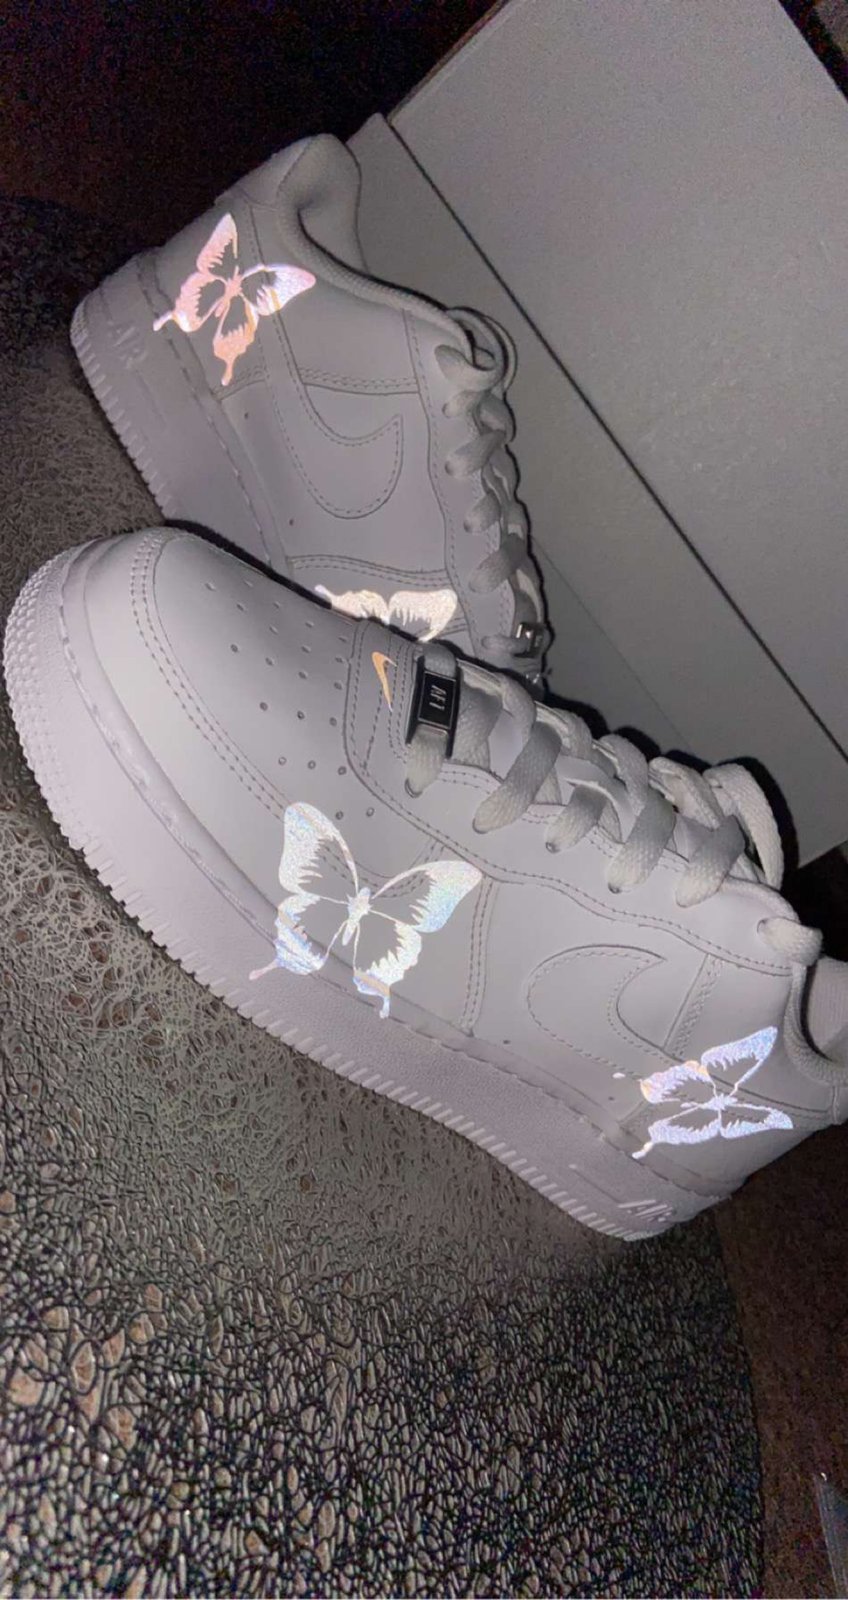 reflective butterfly air force ones